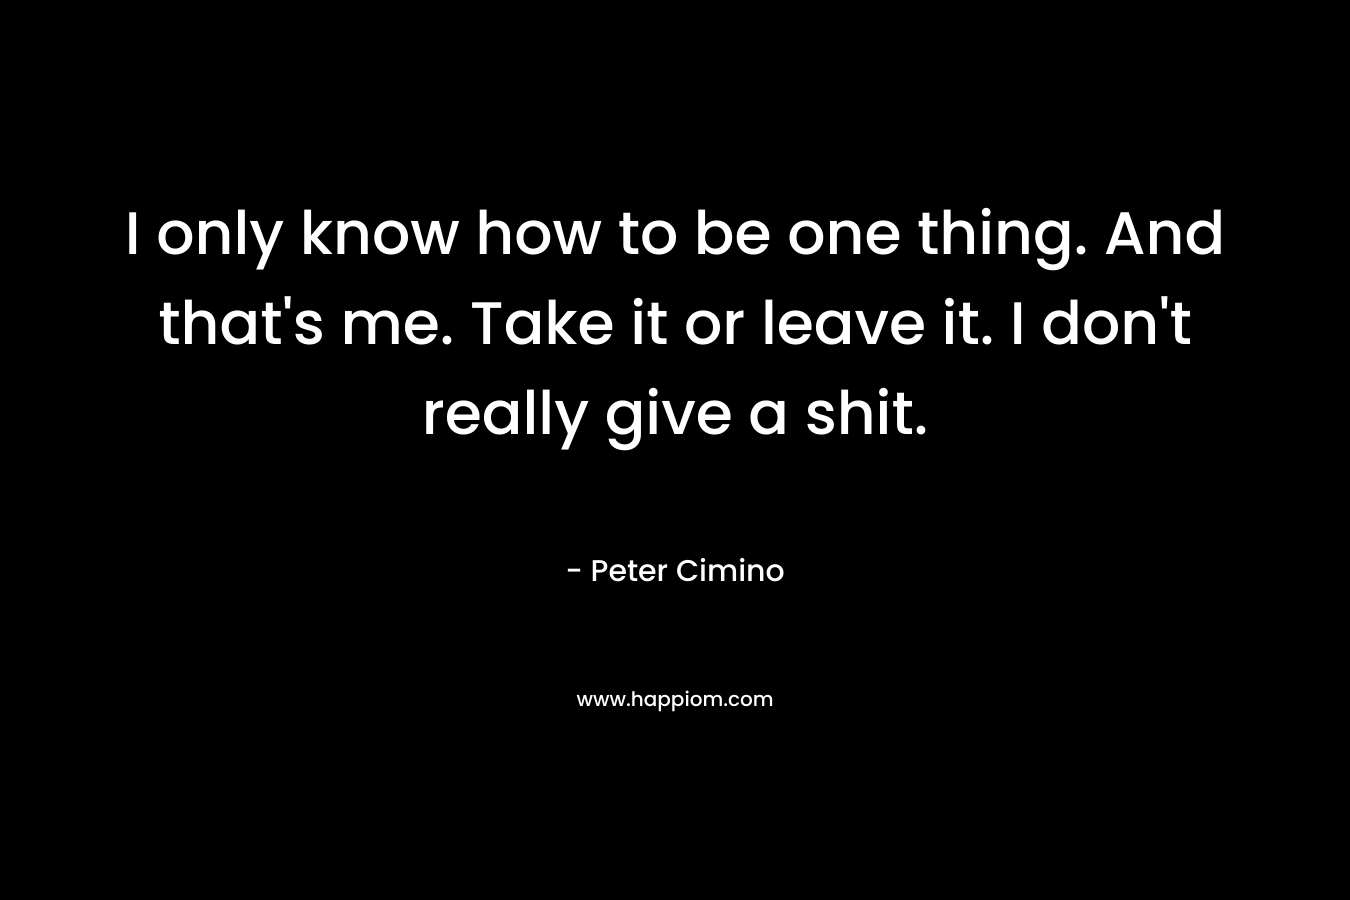 I only know how to be one thing. And that’s me. Take it or leave it. I don’t really give a shit. – Peter Cimino